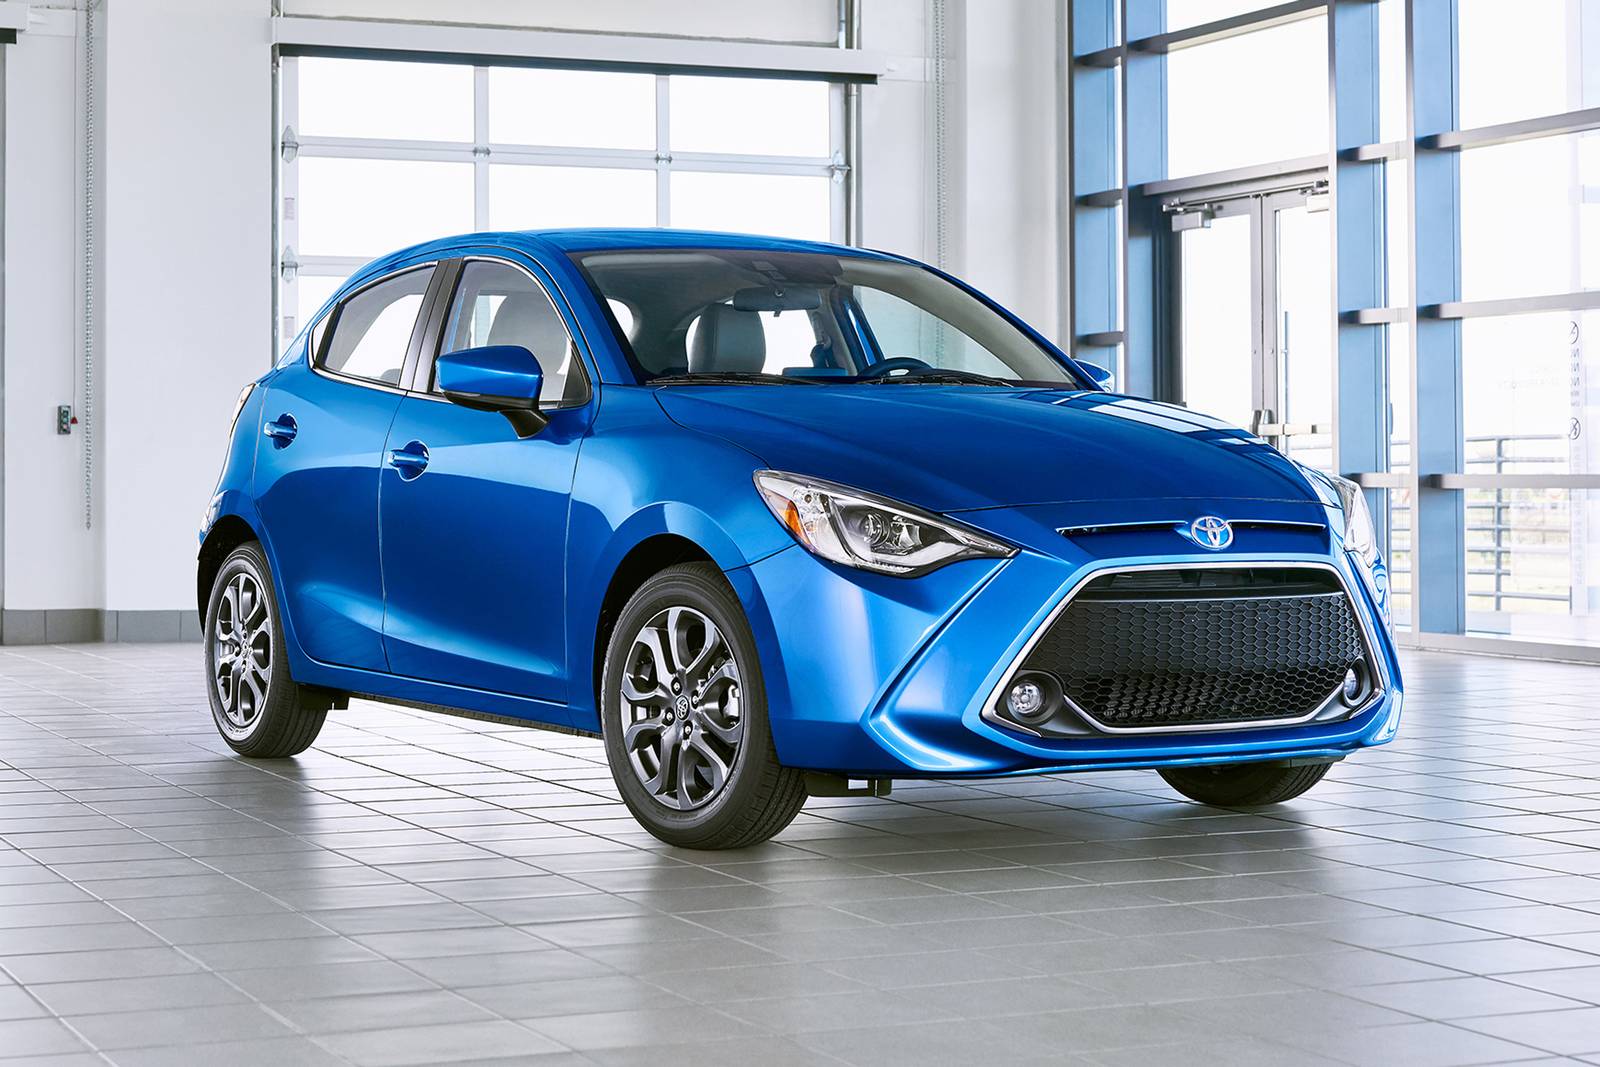 Geroosterd George Eliot gas 2020 Toyota Yaris Hatchback Prices, Reviews, and Pictures | 2020 toyota  yaris le, hatchback cars, 2020 toyota yaris xle